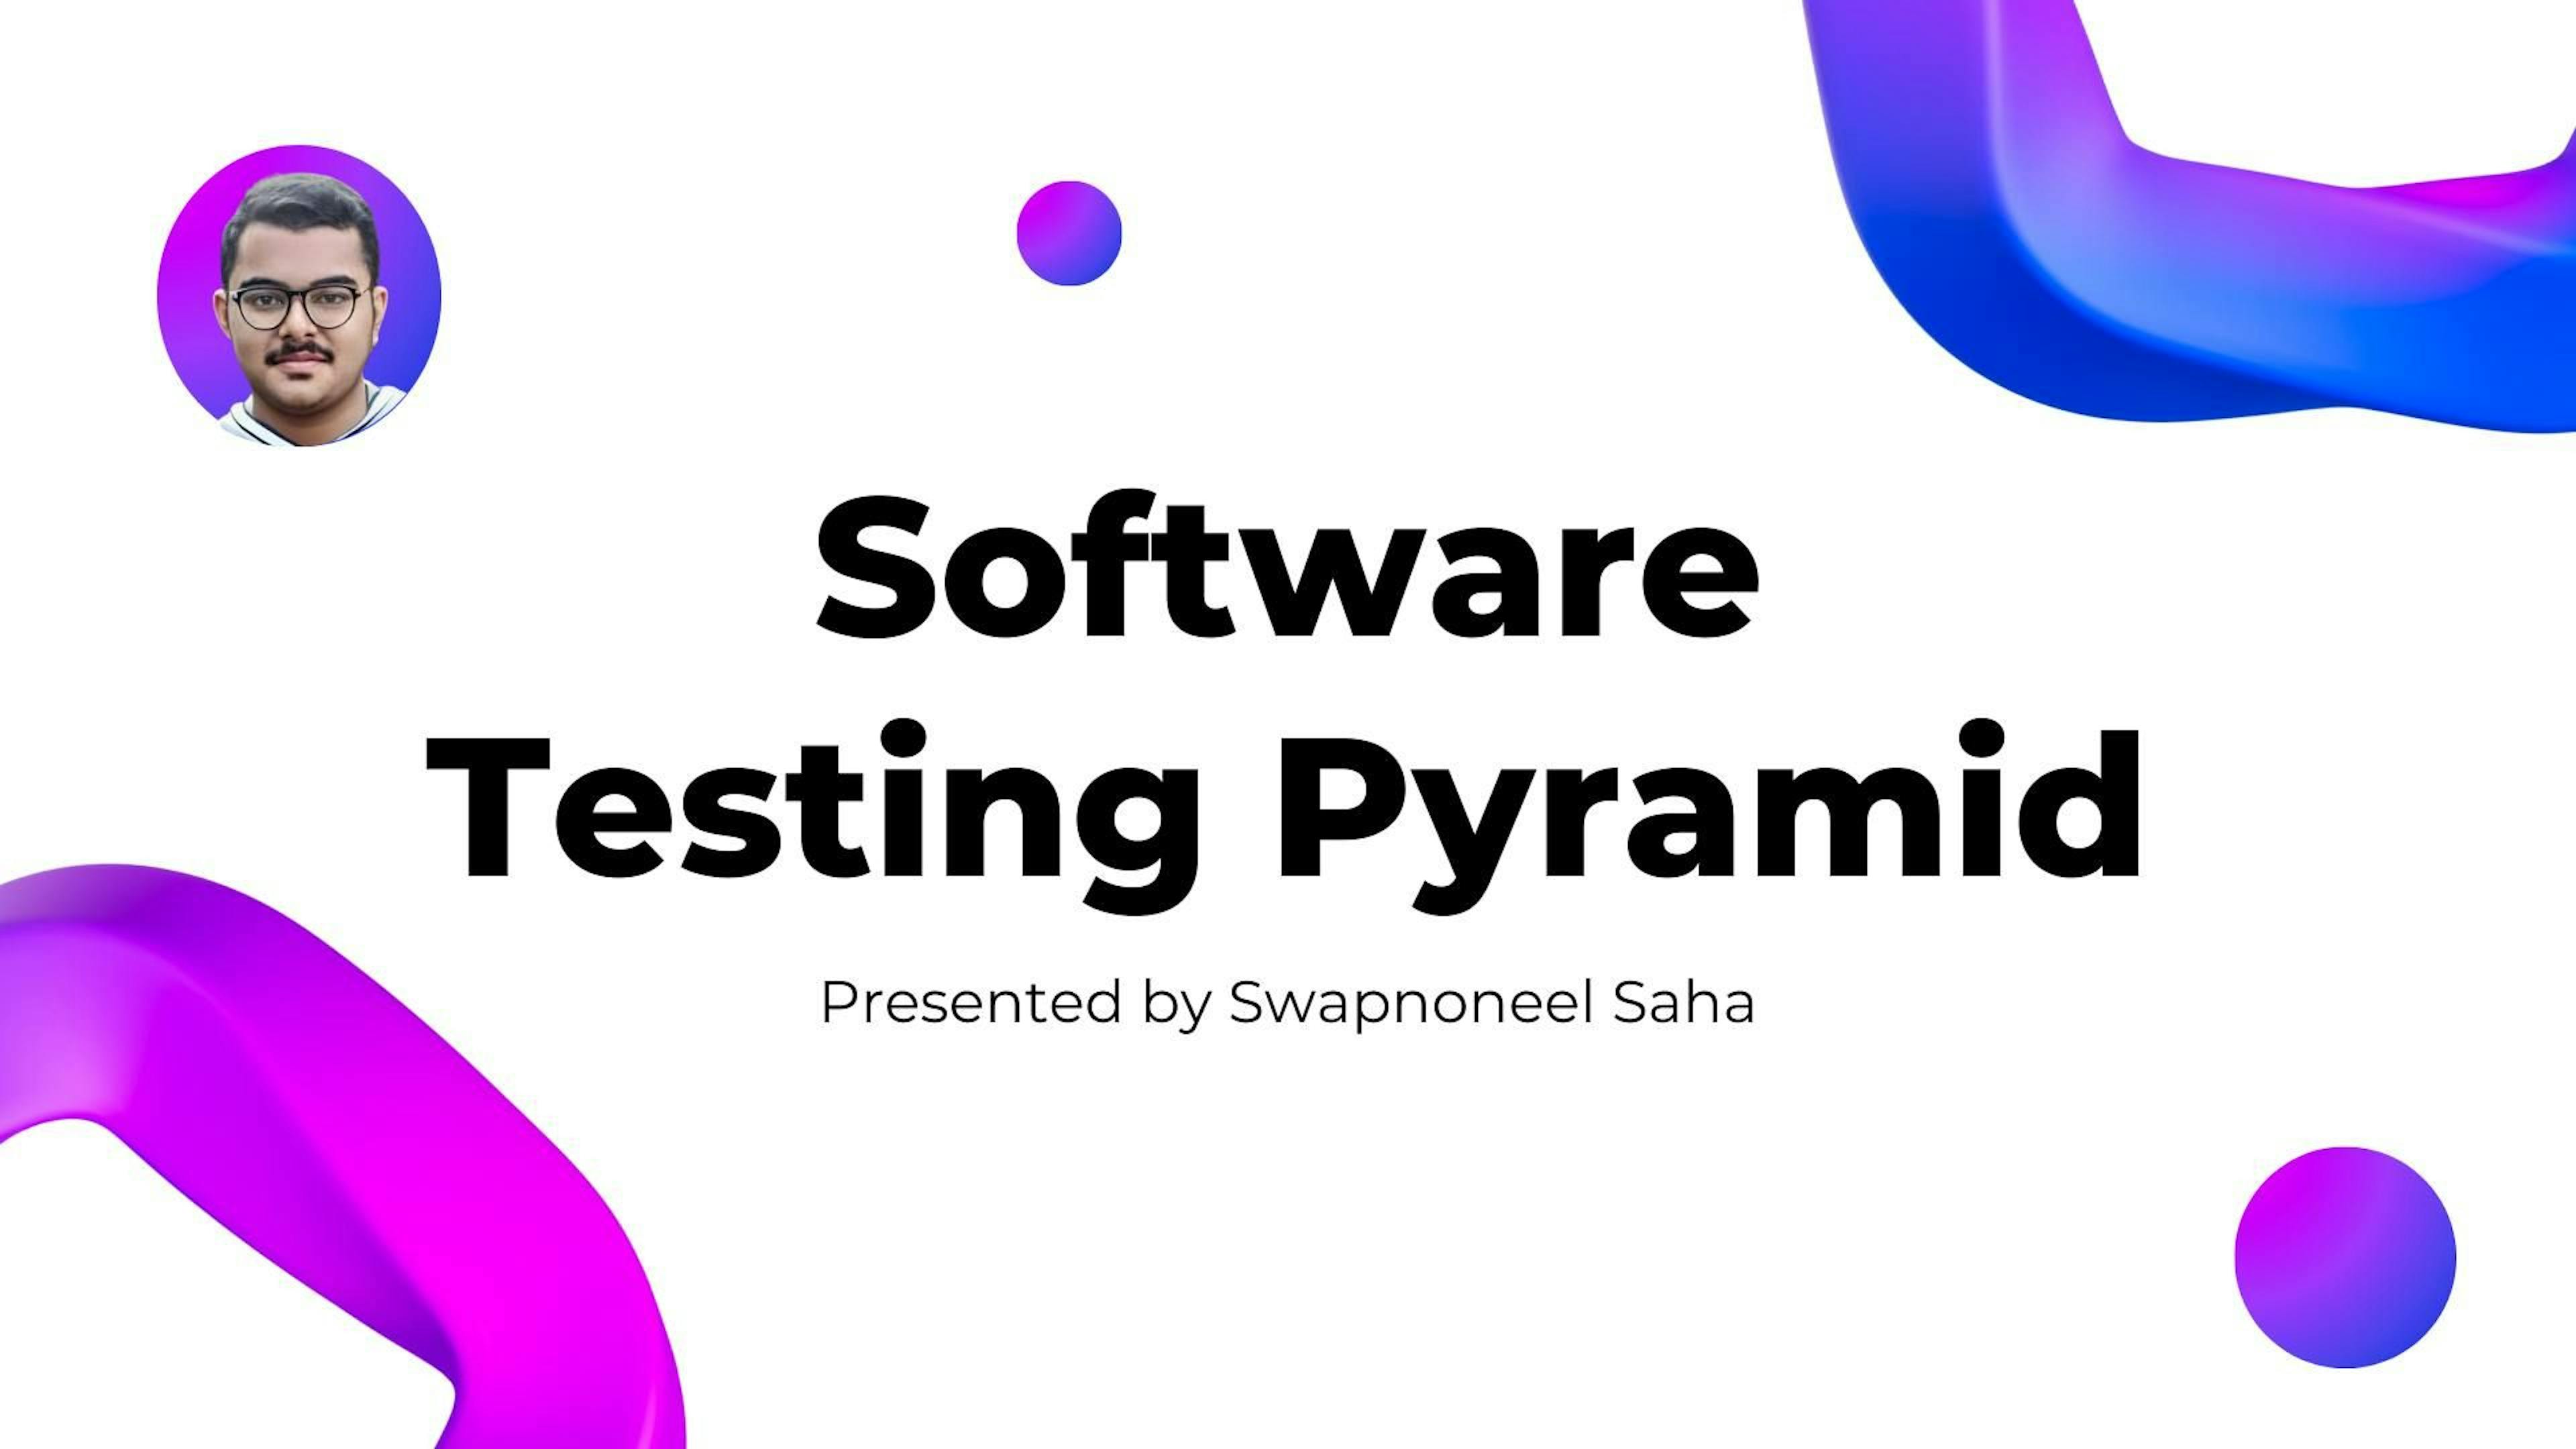 featured image - The Software Testing Pyramid: What's It All About